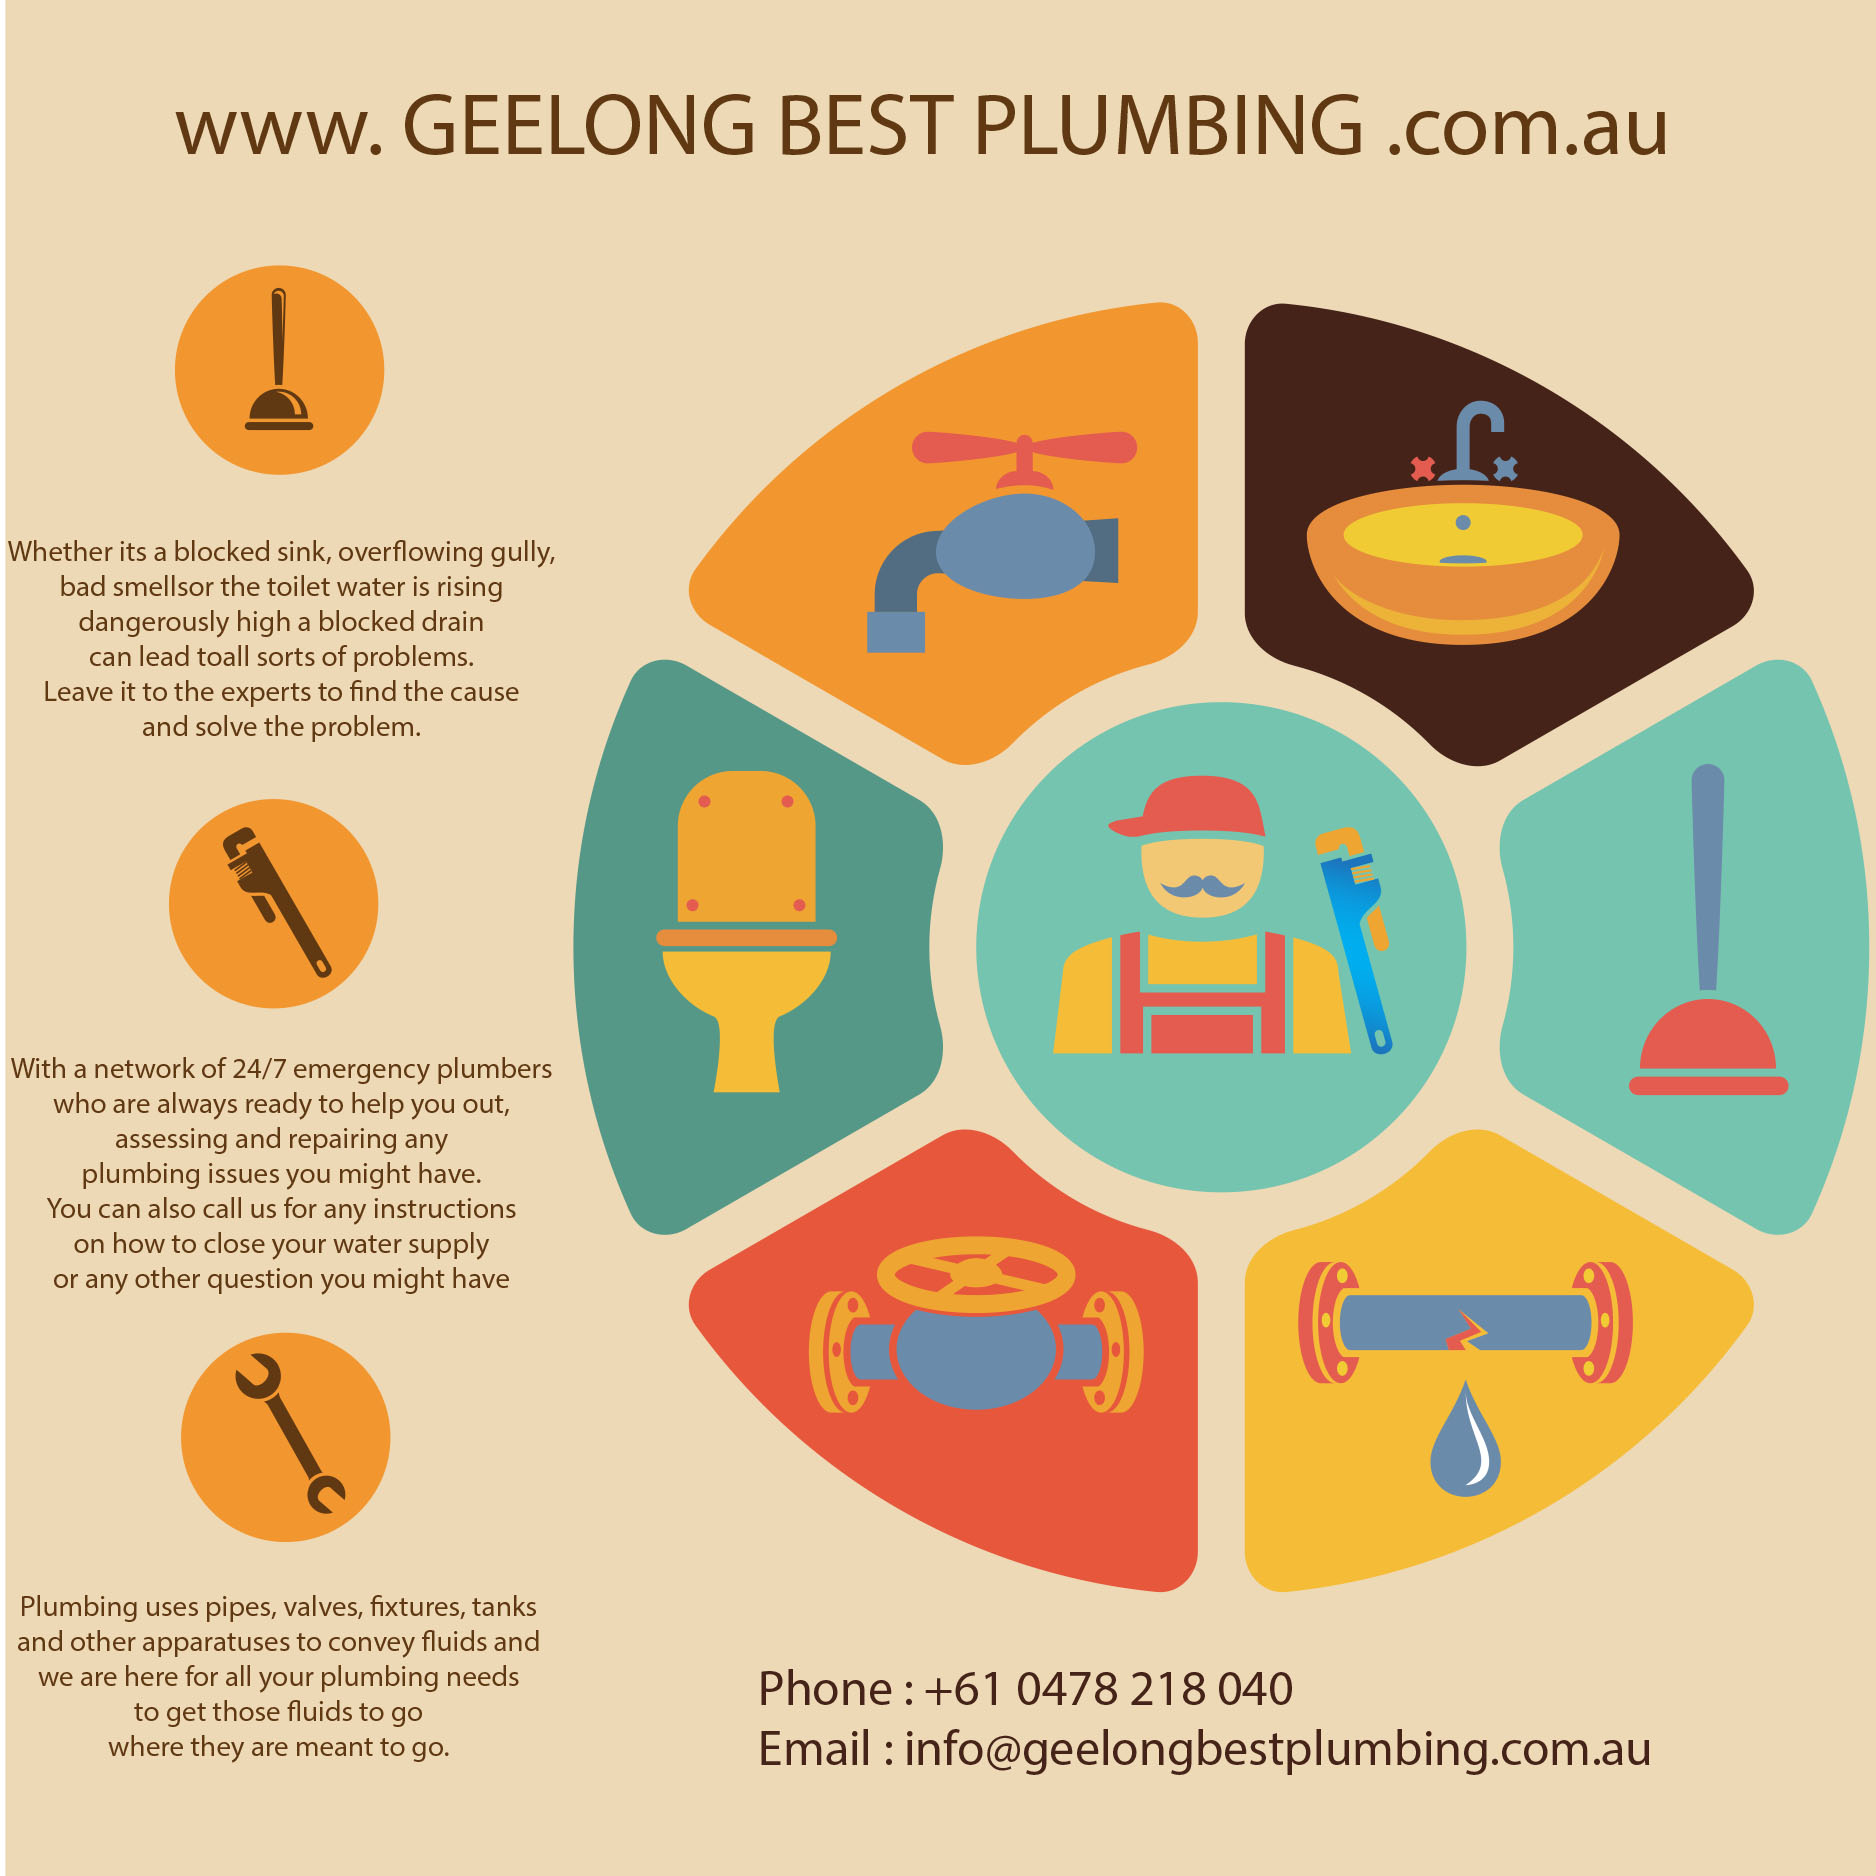 Geelong-Best-Plumbing-services-infographic-and-contacts.jpg